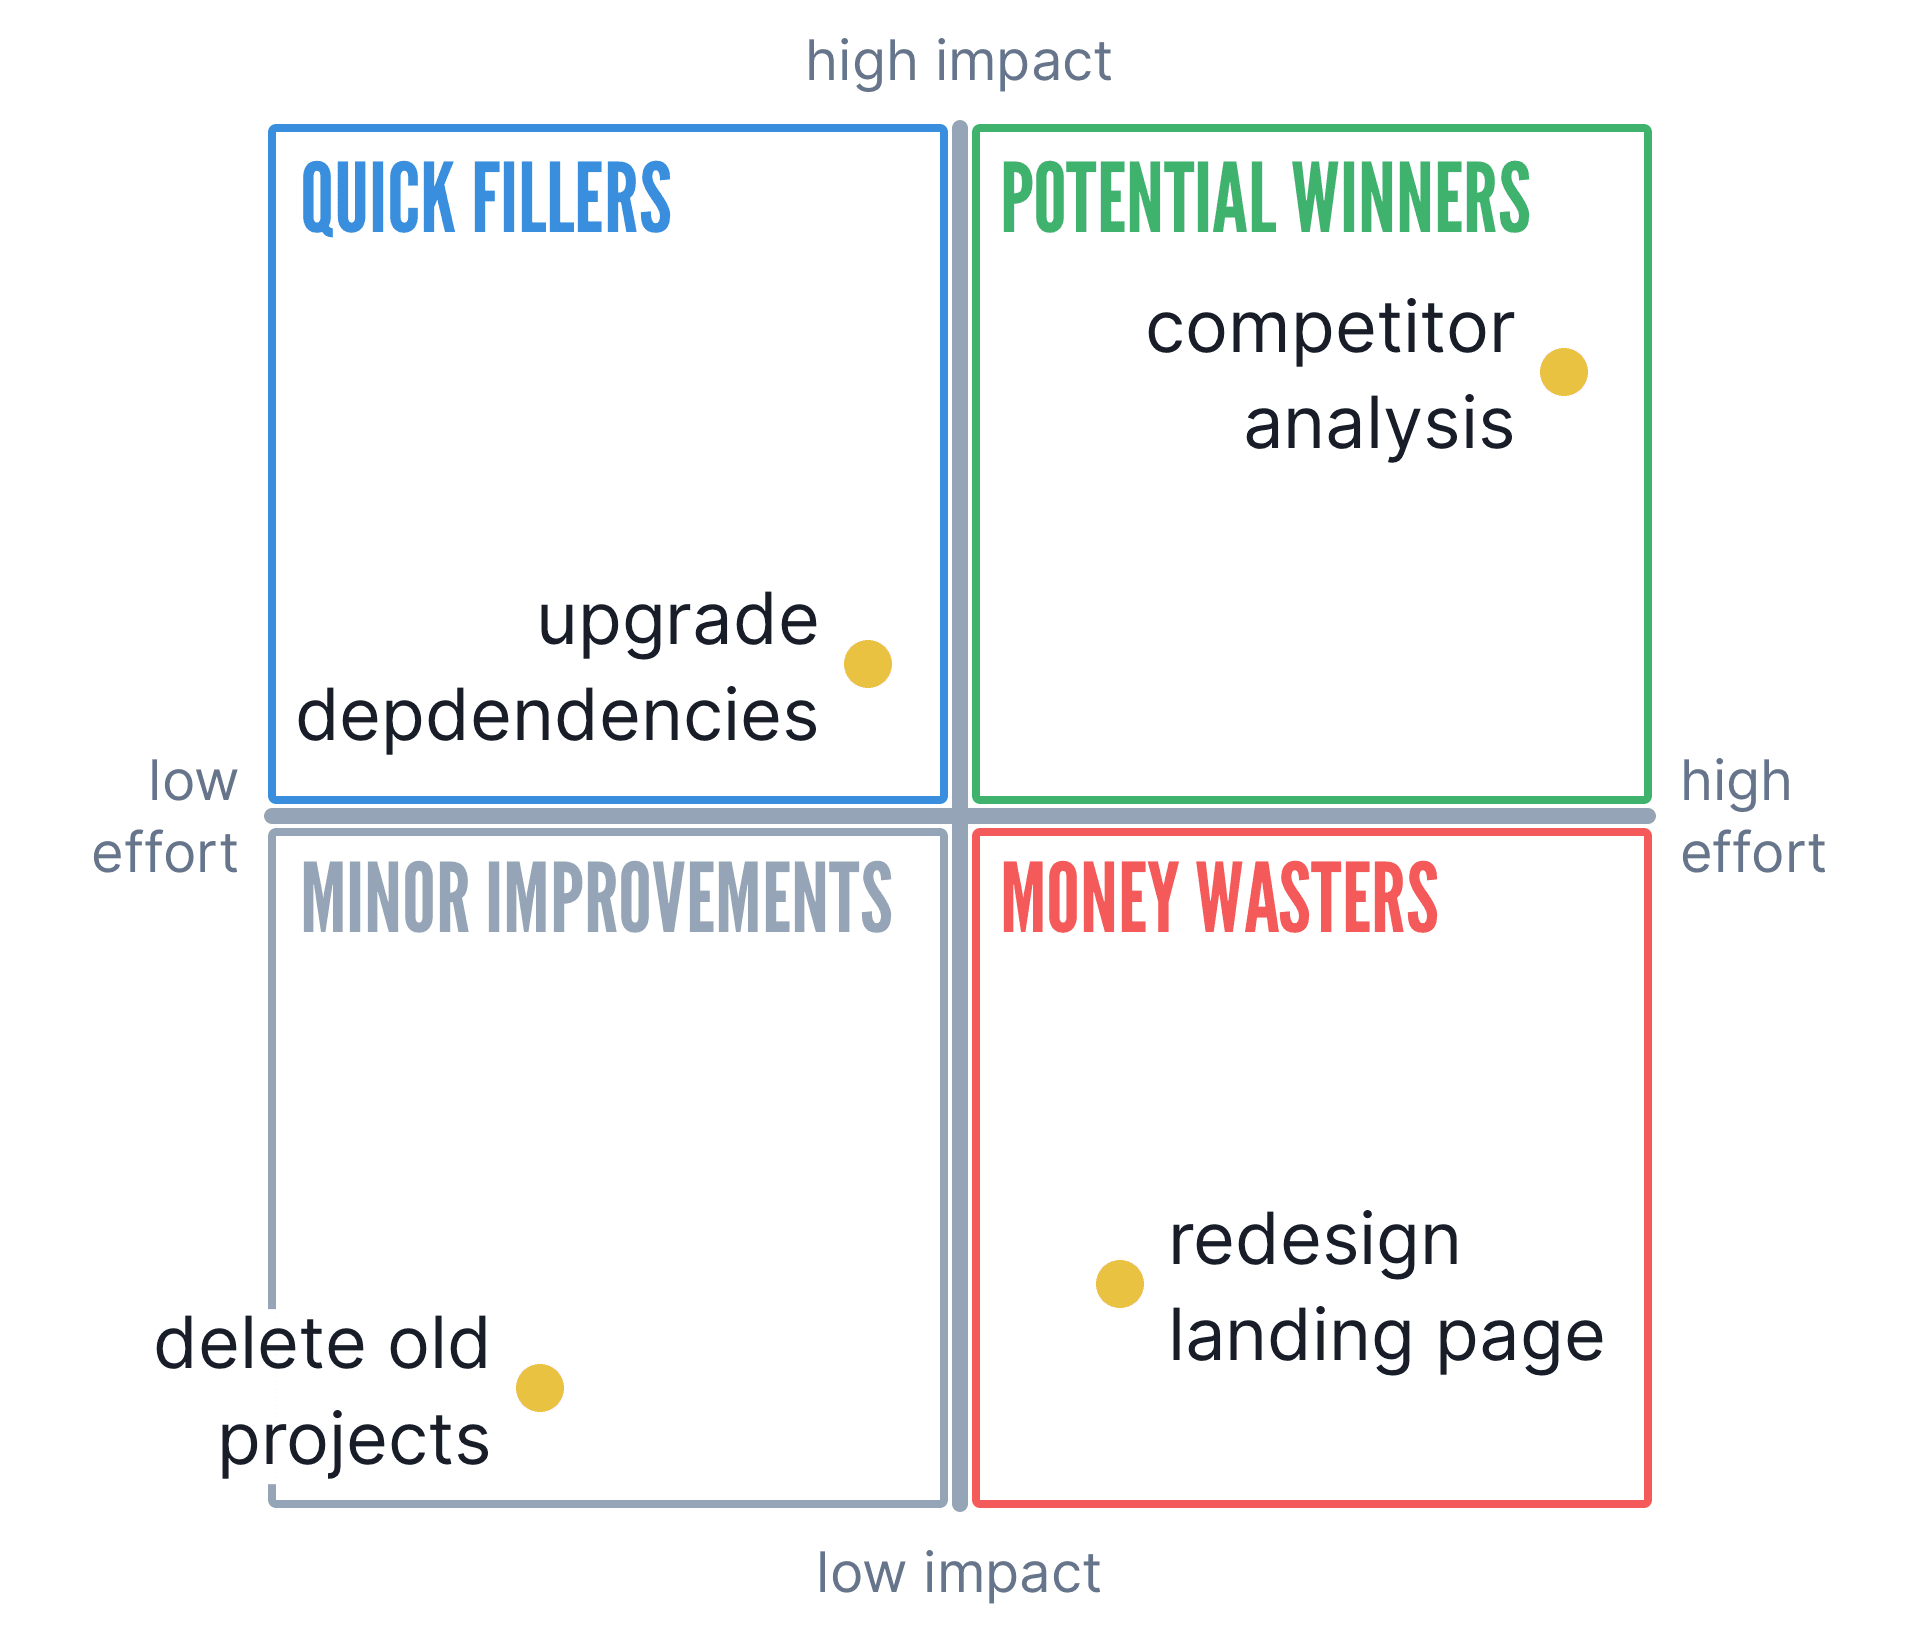 The same chart as before, with the quadrants named. Low effort and low impact: minor improvements. Low effort and high impact: quick fillers. High effort and high impact: potential winners. High effort and low impact: money wasters.